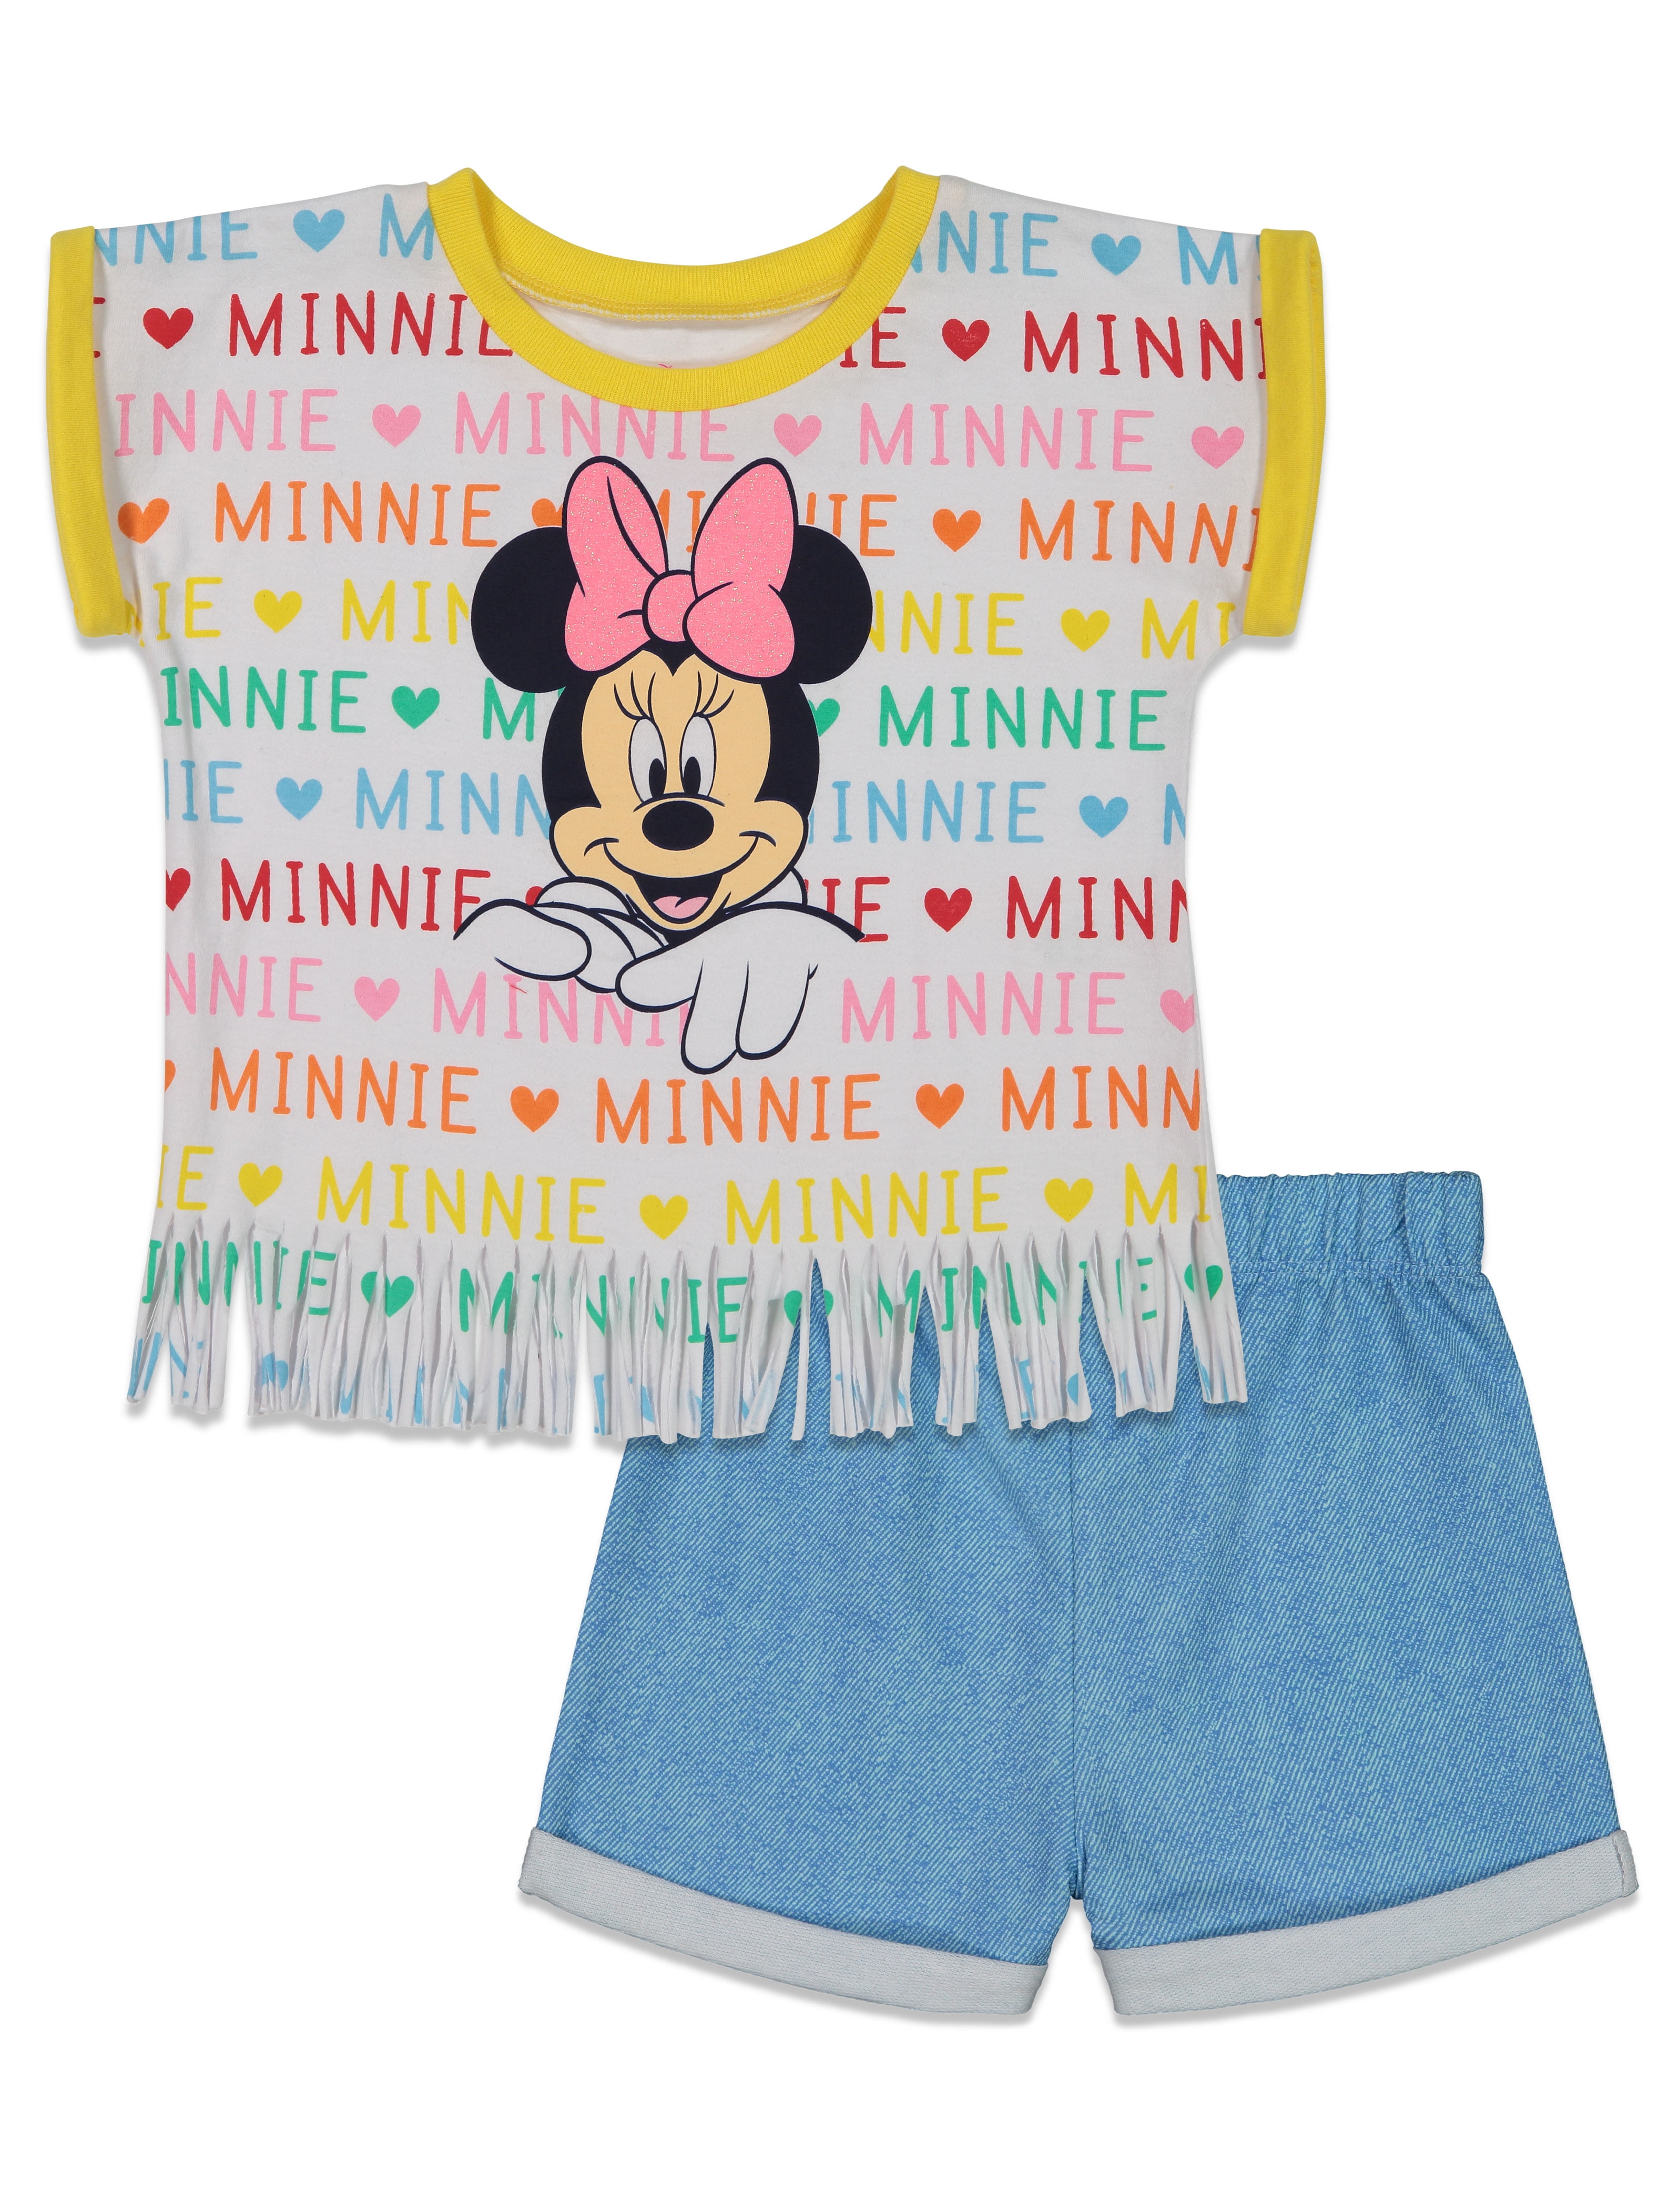 Disney Minnie Mouse Girls T-Shirt and Shorts Set